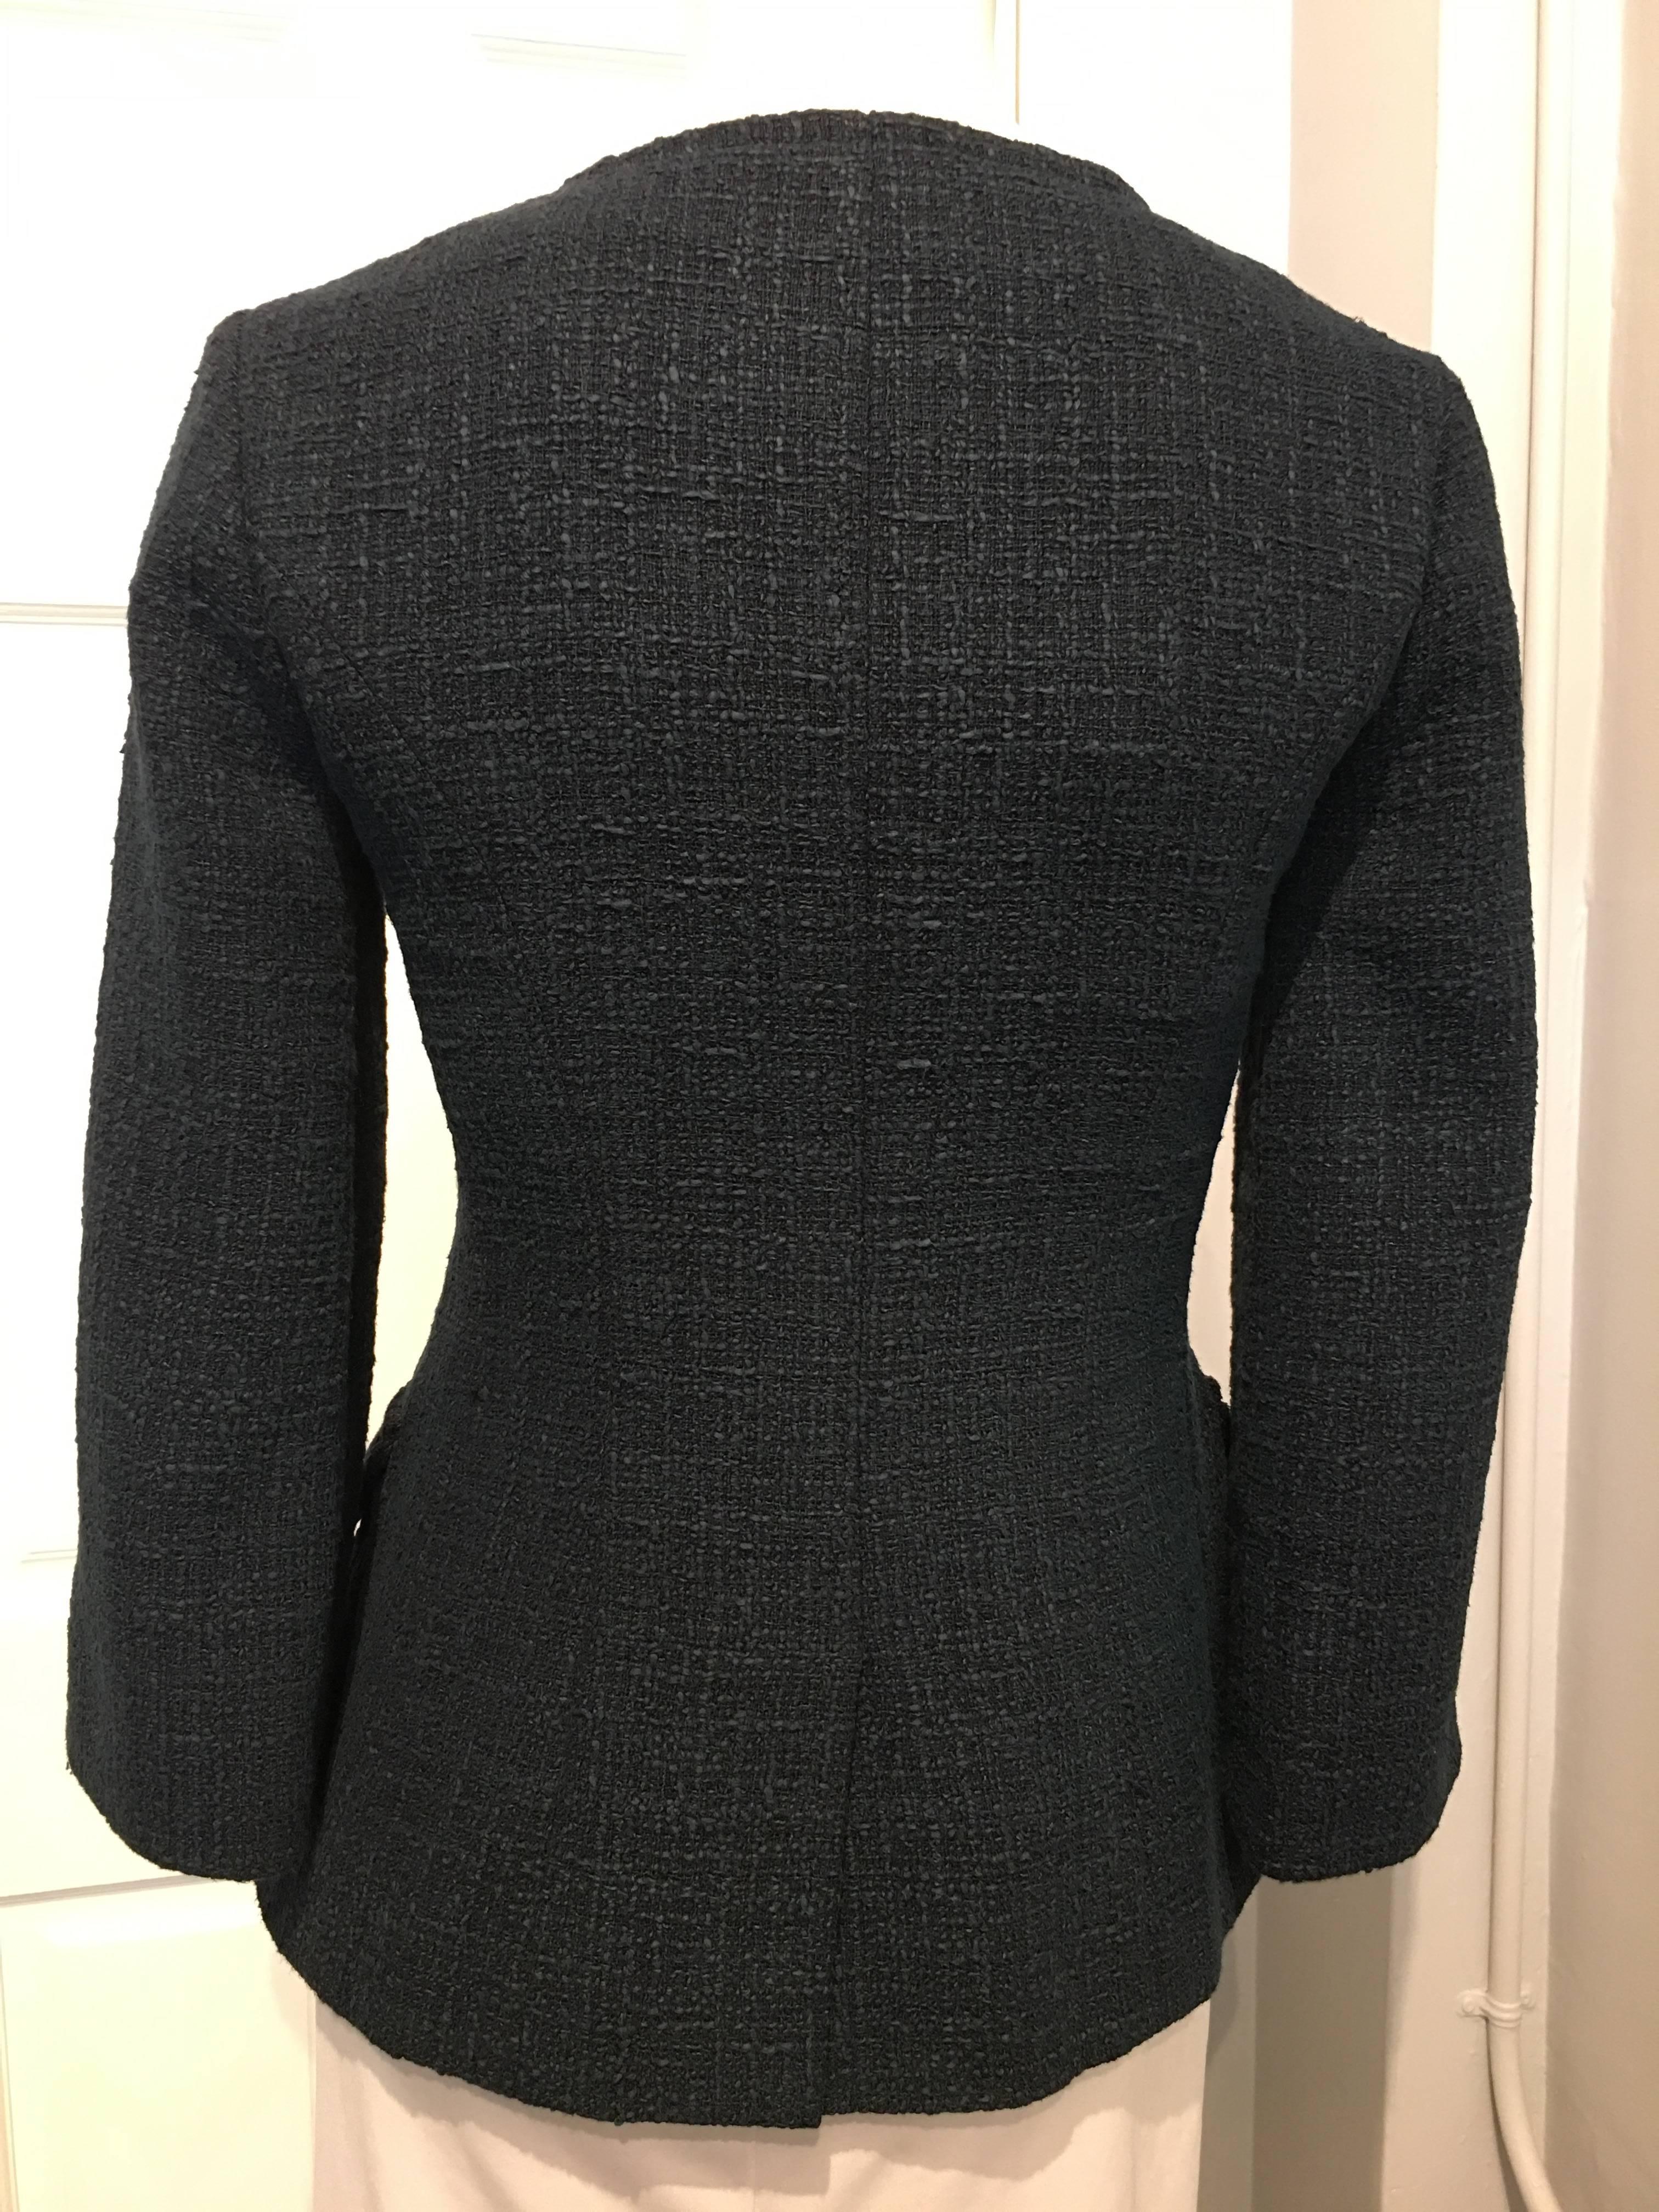 Chanel Navy Jacket In Excellent Condition For Sale In San Francisco, CA